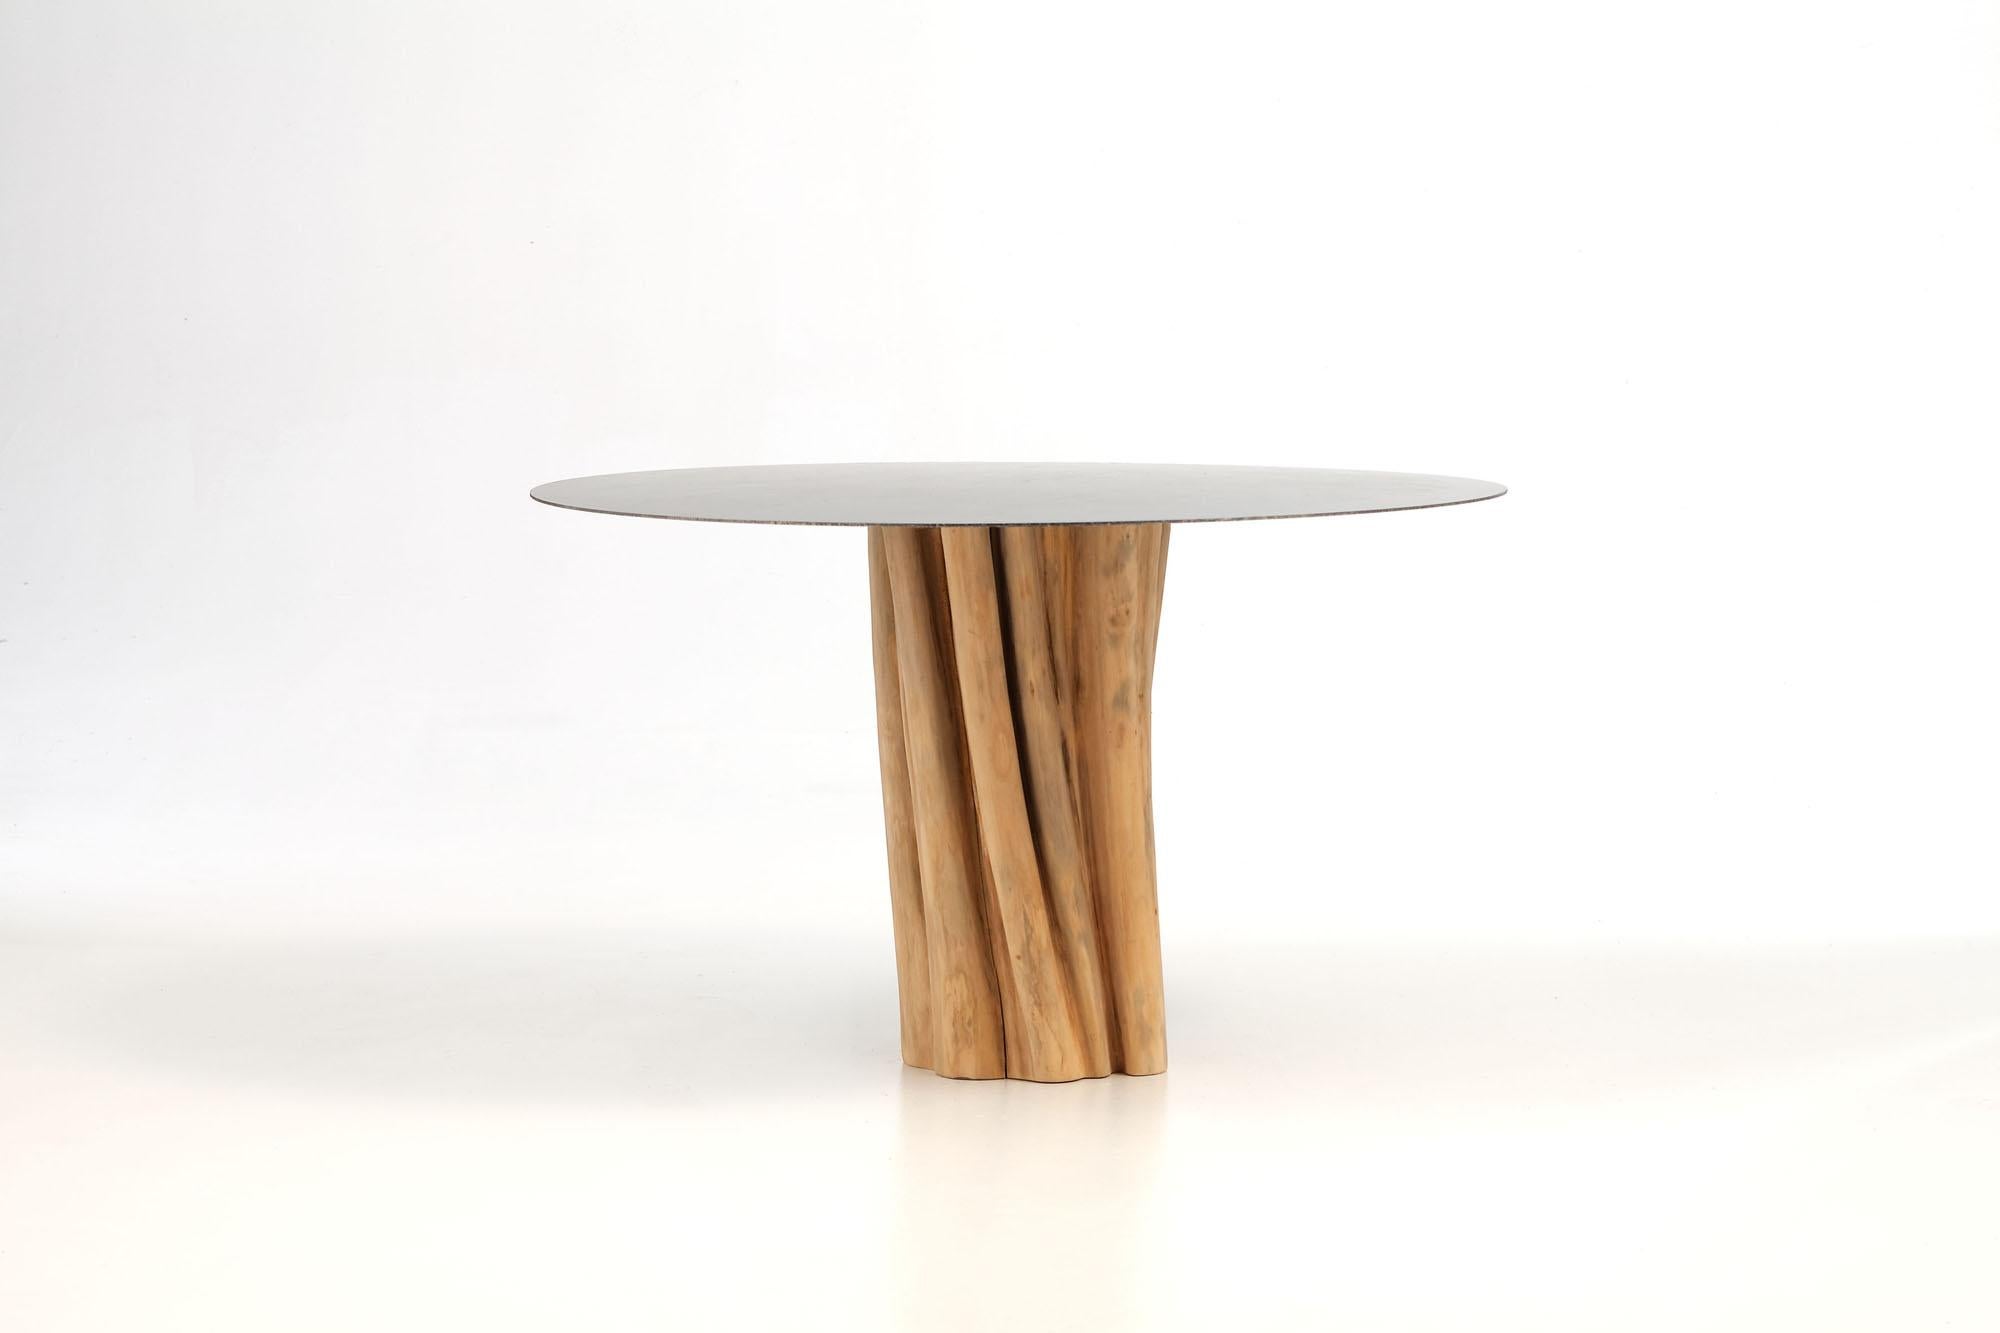 A strong and distinctive sign characterises the Brick 32/33/34/36 family of tables. Nordic references are evident in the base made of sections of natural debarked hornbeam trunk, which is in visual contrast to the thin waxed iron sheet top.